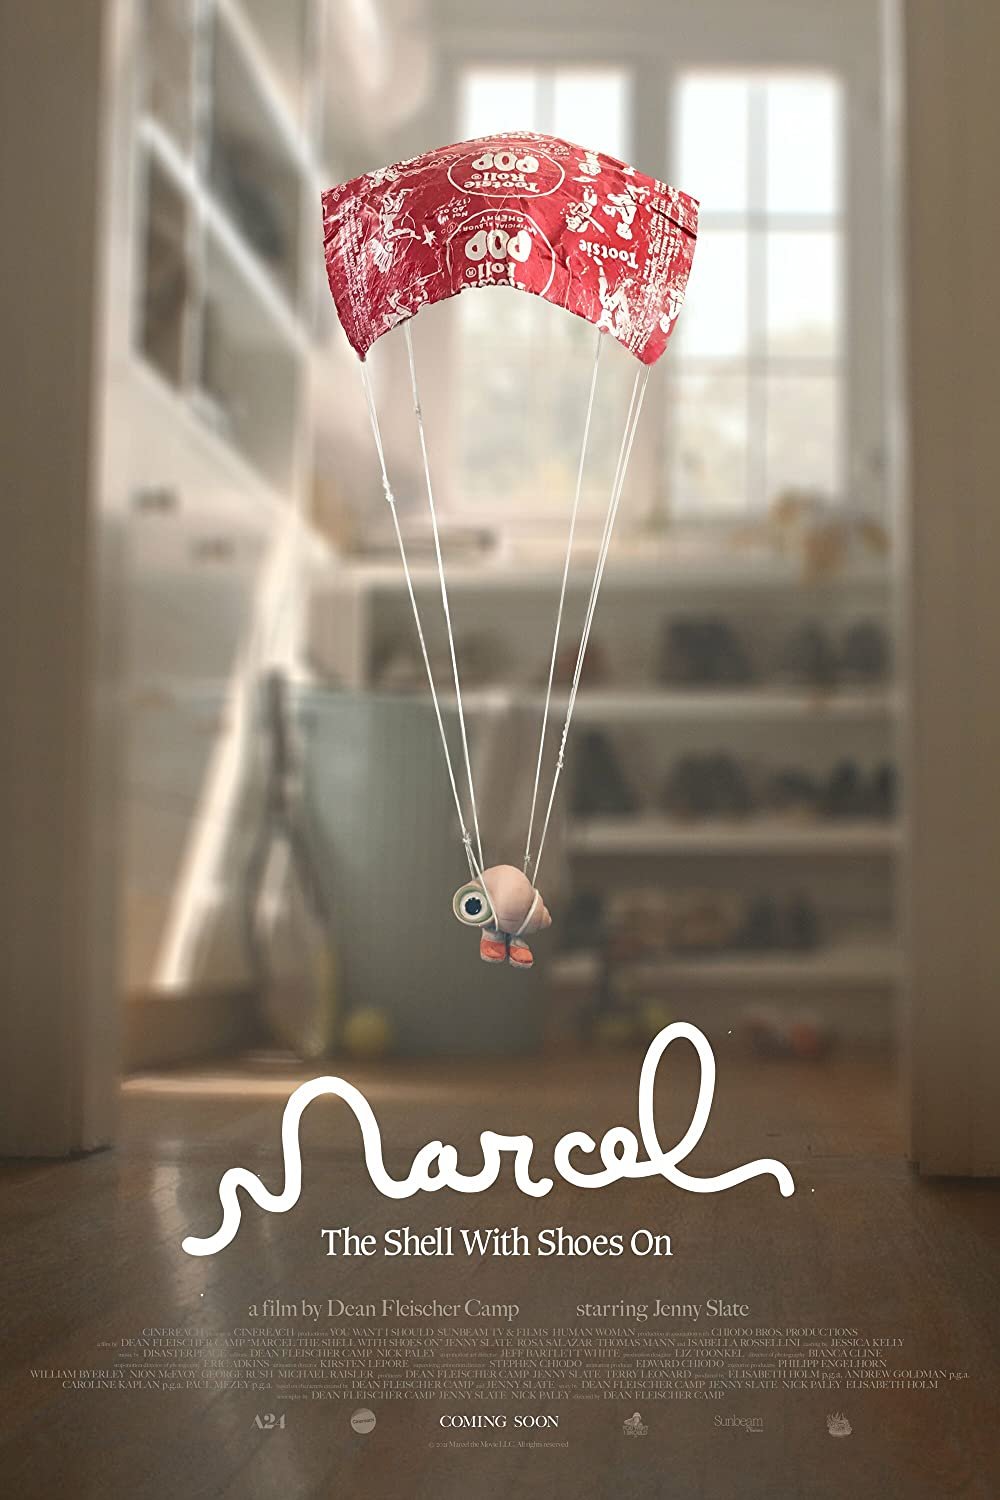 Marcel The Shell images © A24